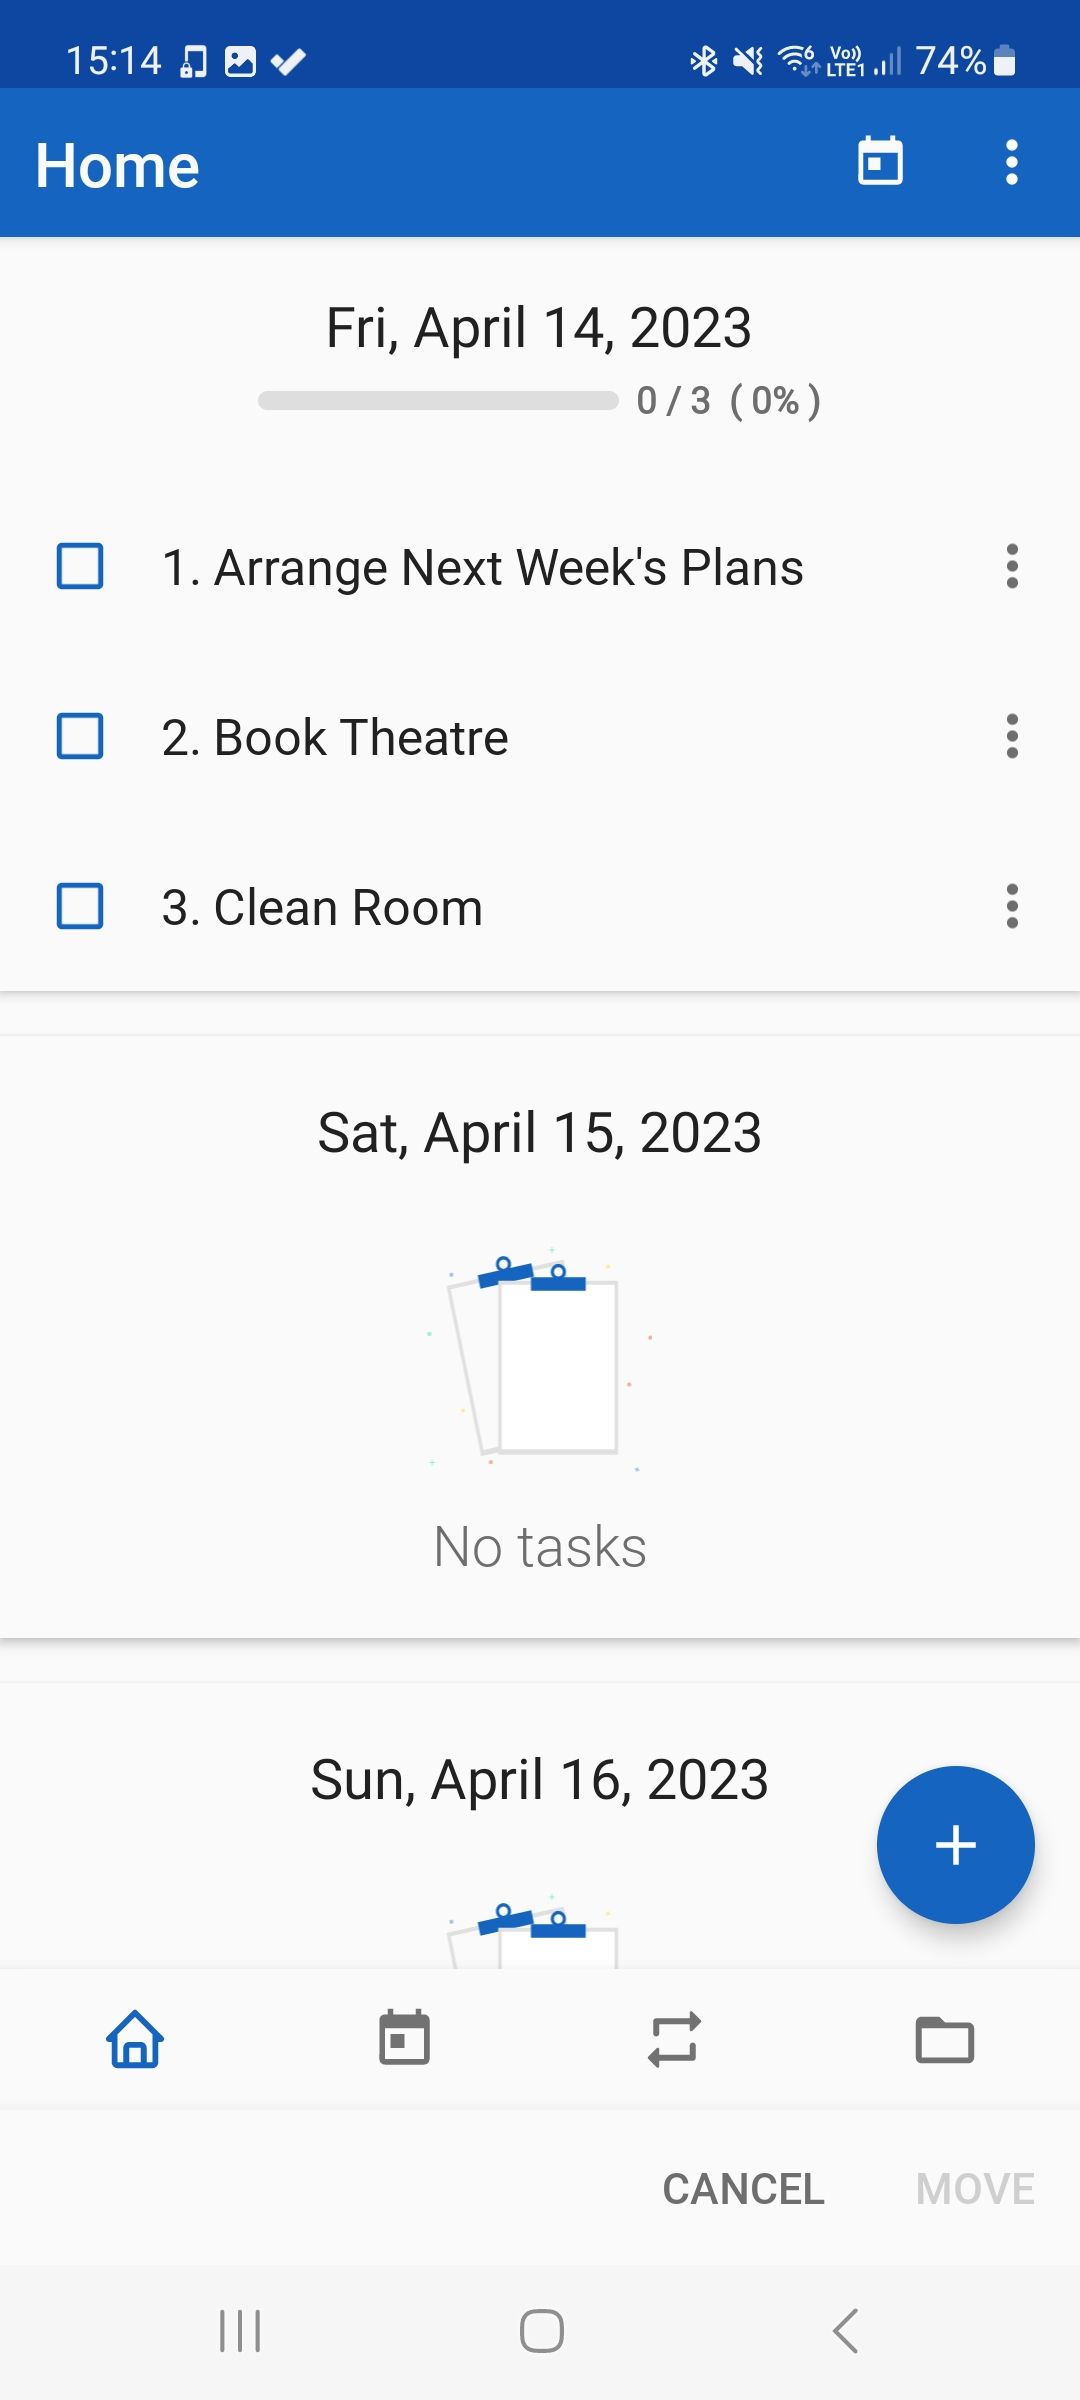 My Daily Planner Home tab preview of tasks